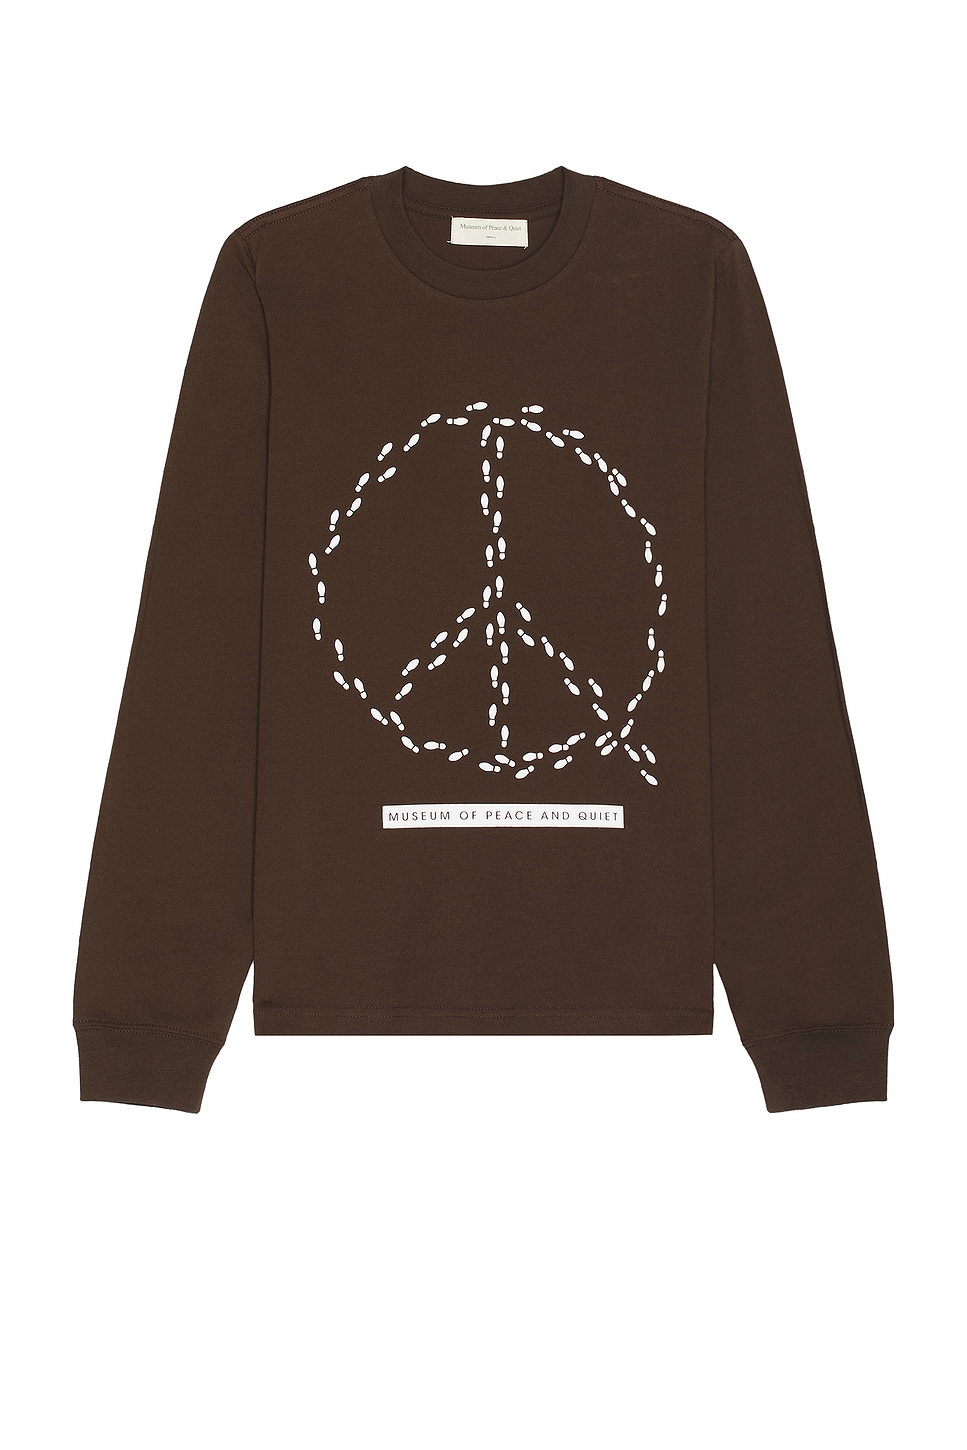 Image 1 of Museum of Peace and Quiet Peaceful Path Long Sleeve Shirt in Brown